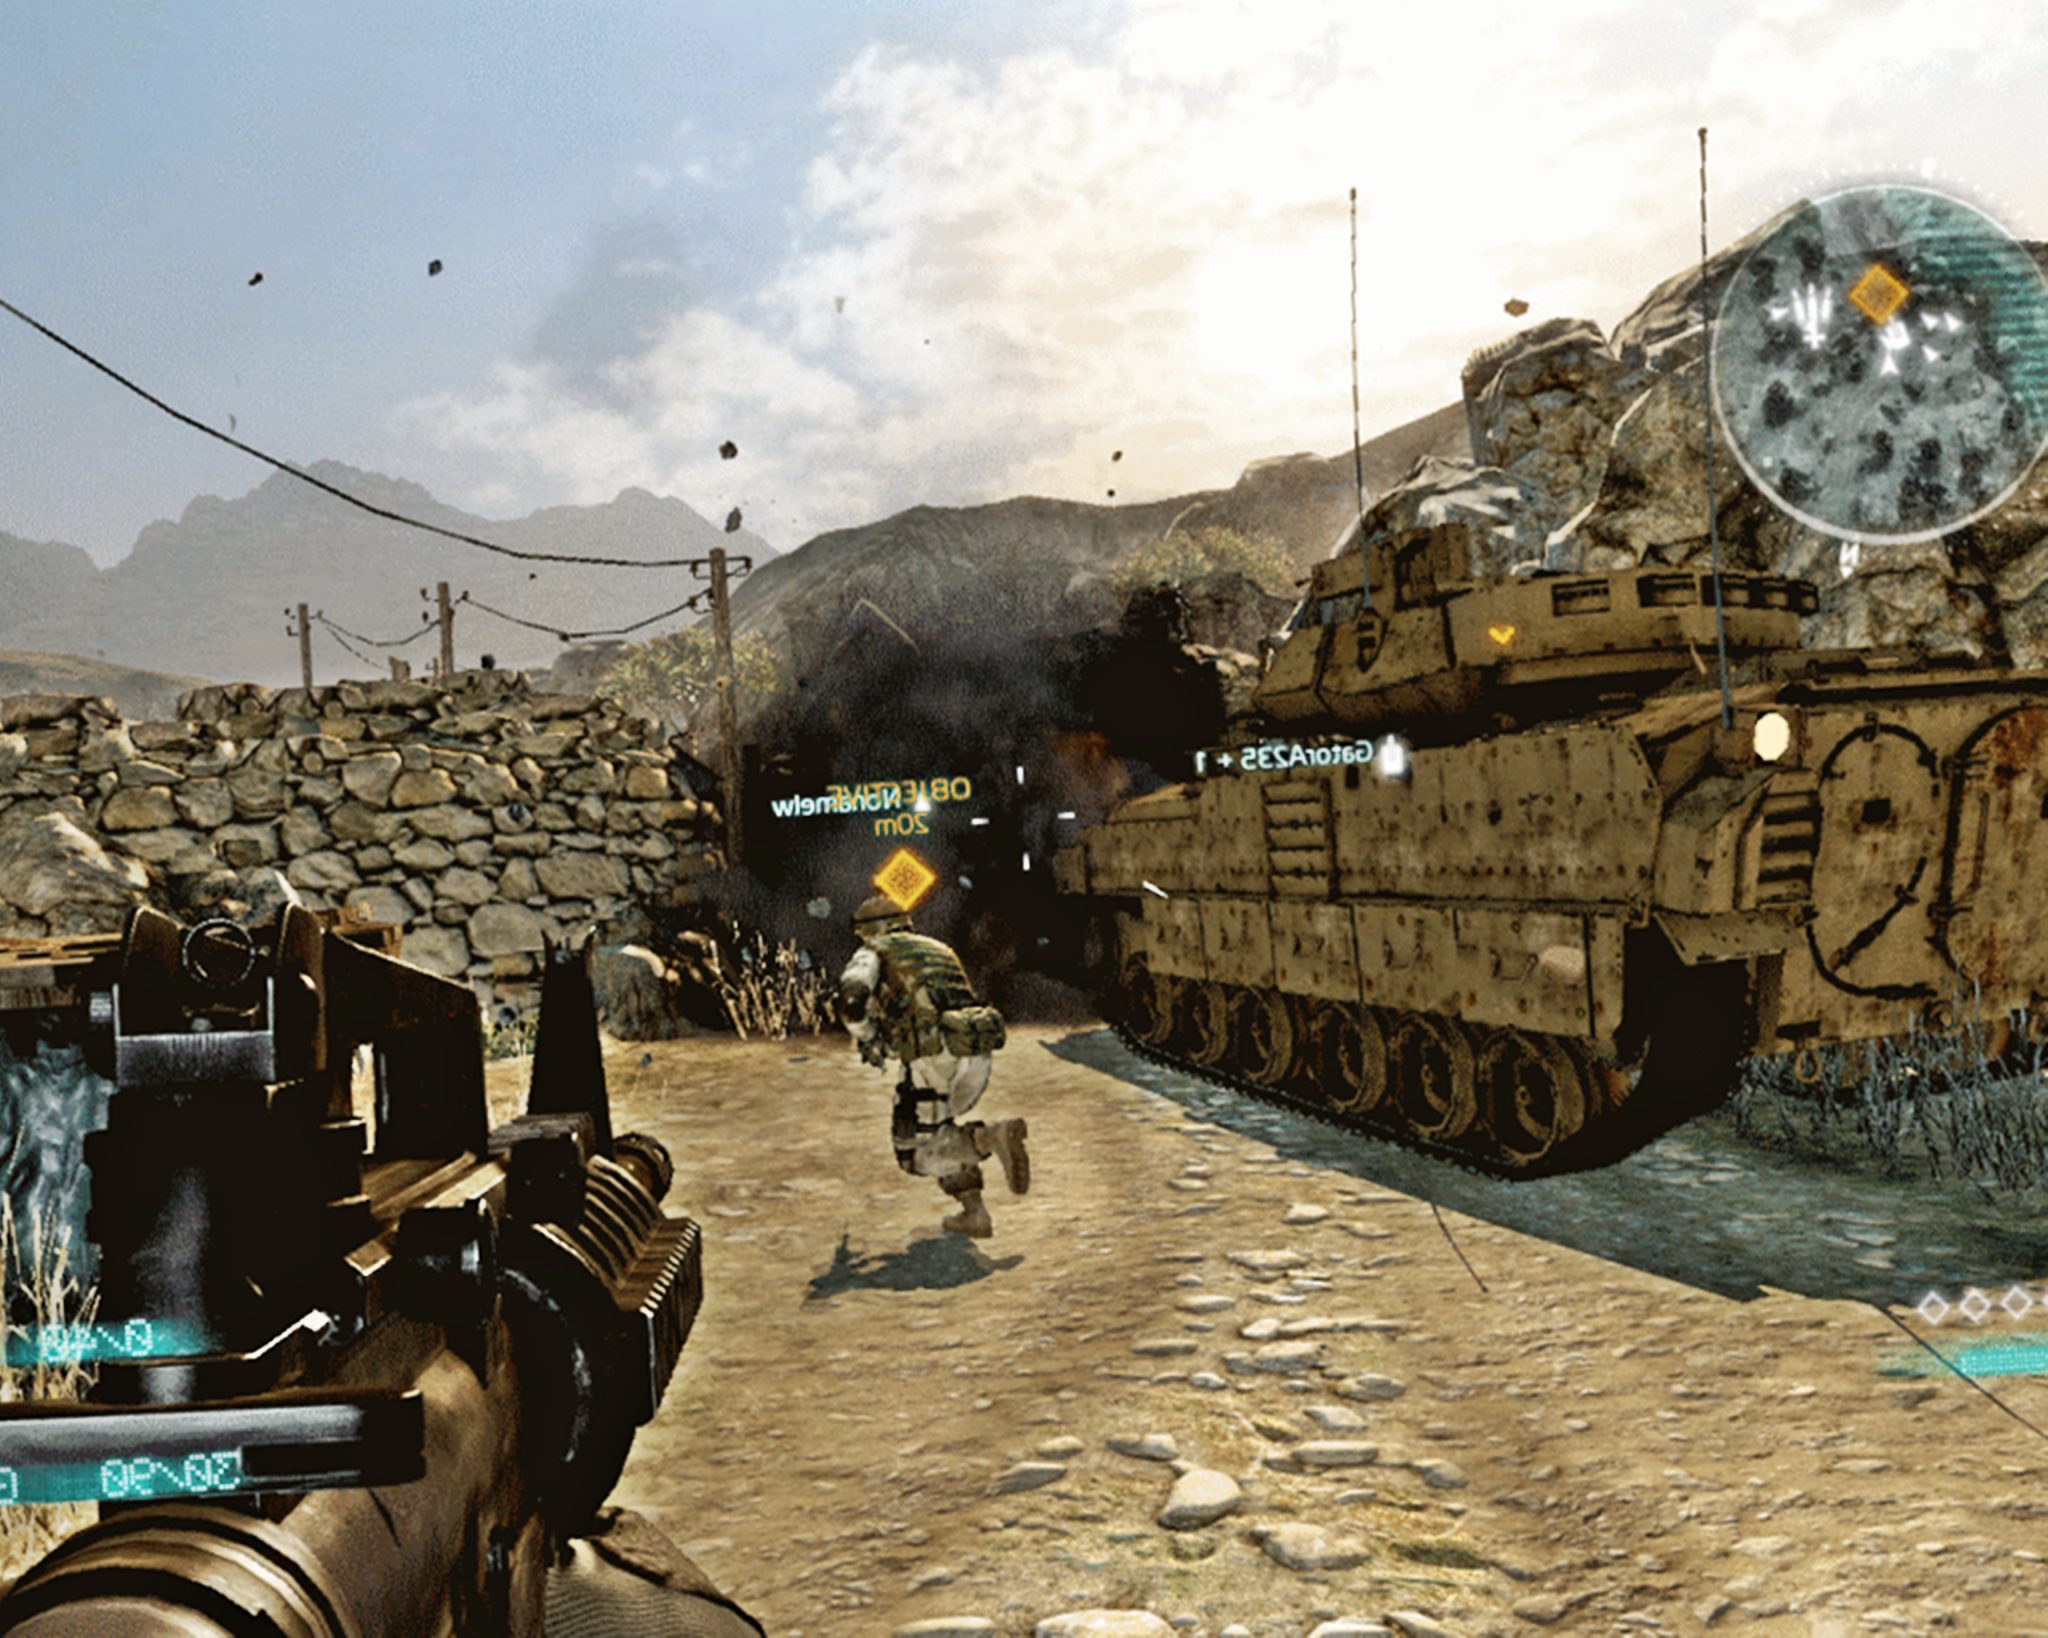 medal of honor online free play